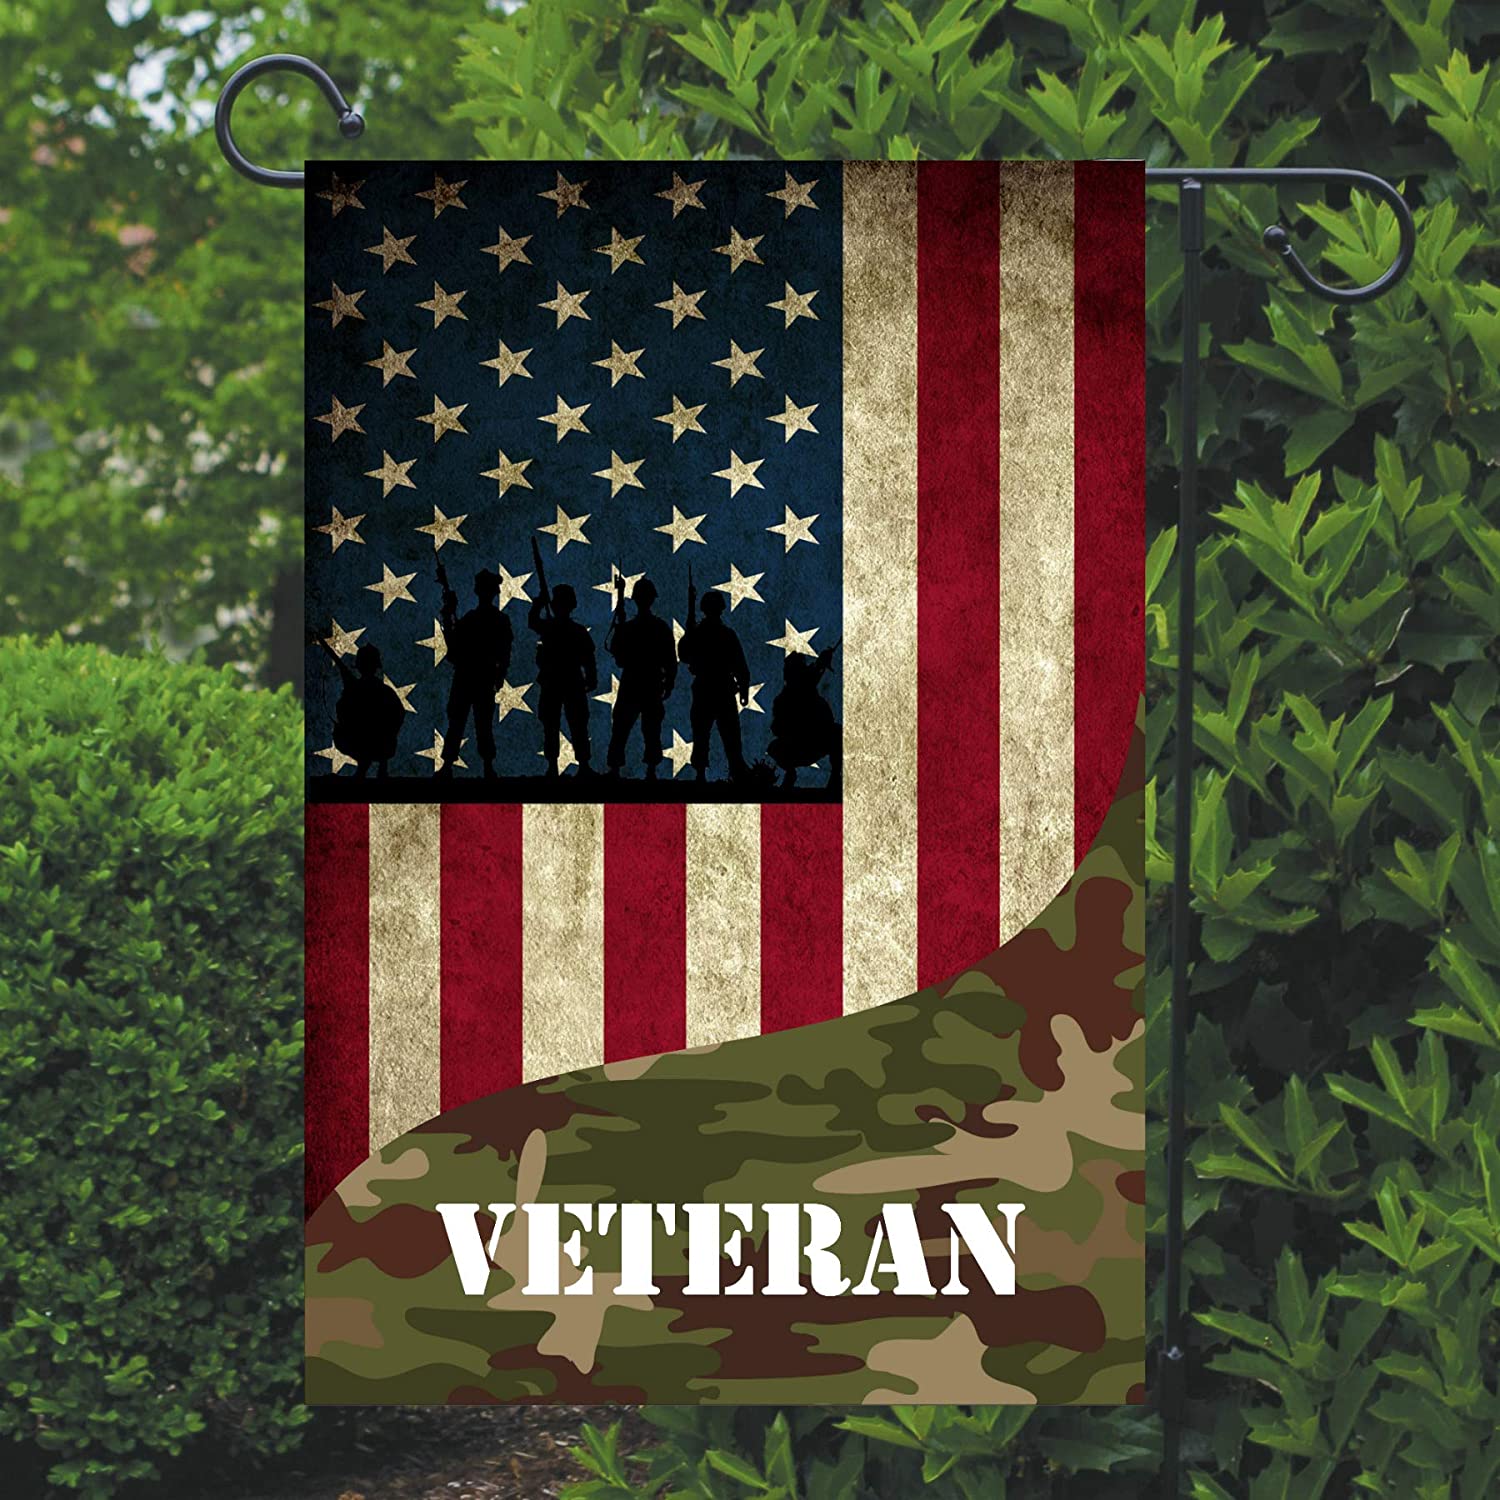 American Military Garden Flag, Personalized, Veteran Garden Flag, Army Garden Flag, Patriotic Yard Flag, American Flag Decor, Army, Military, Handmade Products